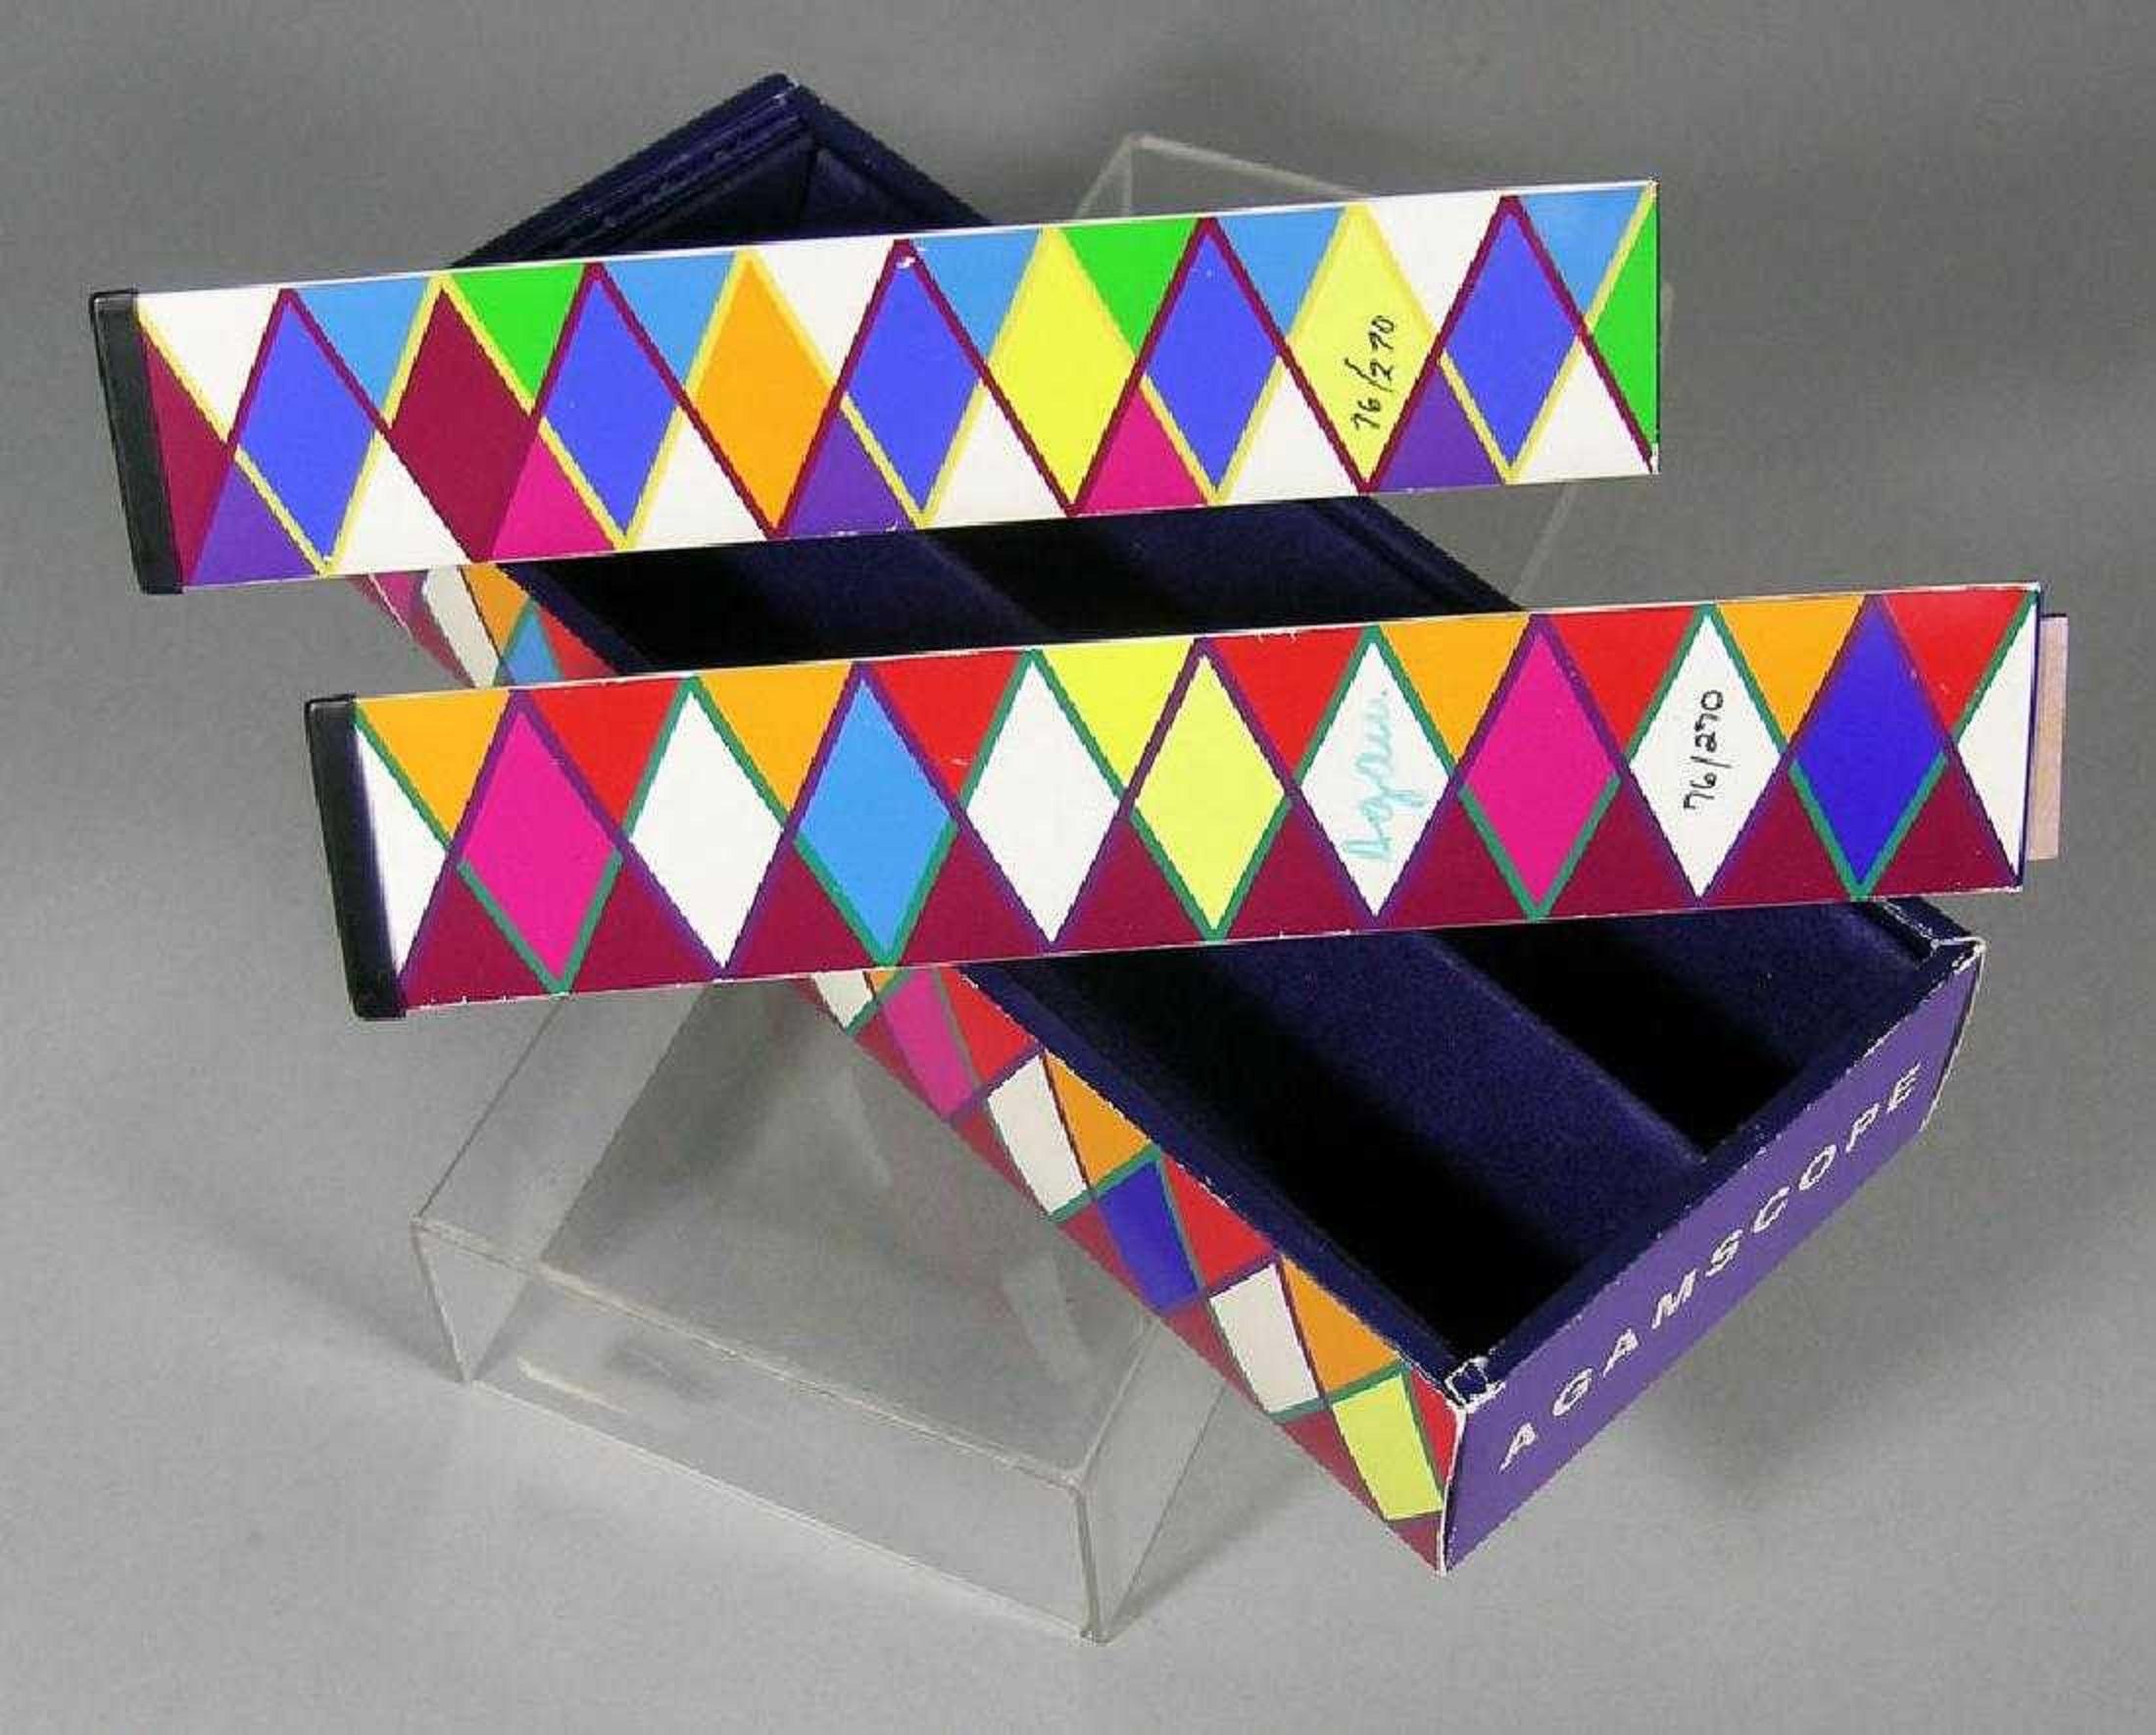 This is a rare boxed pair of Yacov Agam Agamascope Kaleidoscope devices with silkscreen paper applied, hand signed and numbered. 

biographical info: The son of a rabbi, Agam can trace his ancestry back six generations to the founder of the Chabad